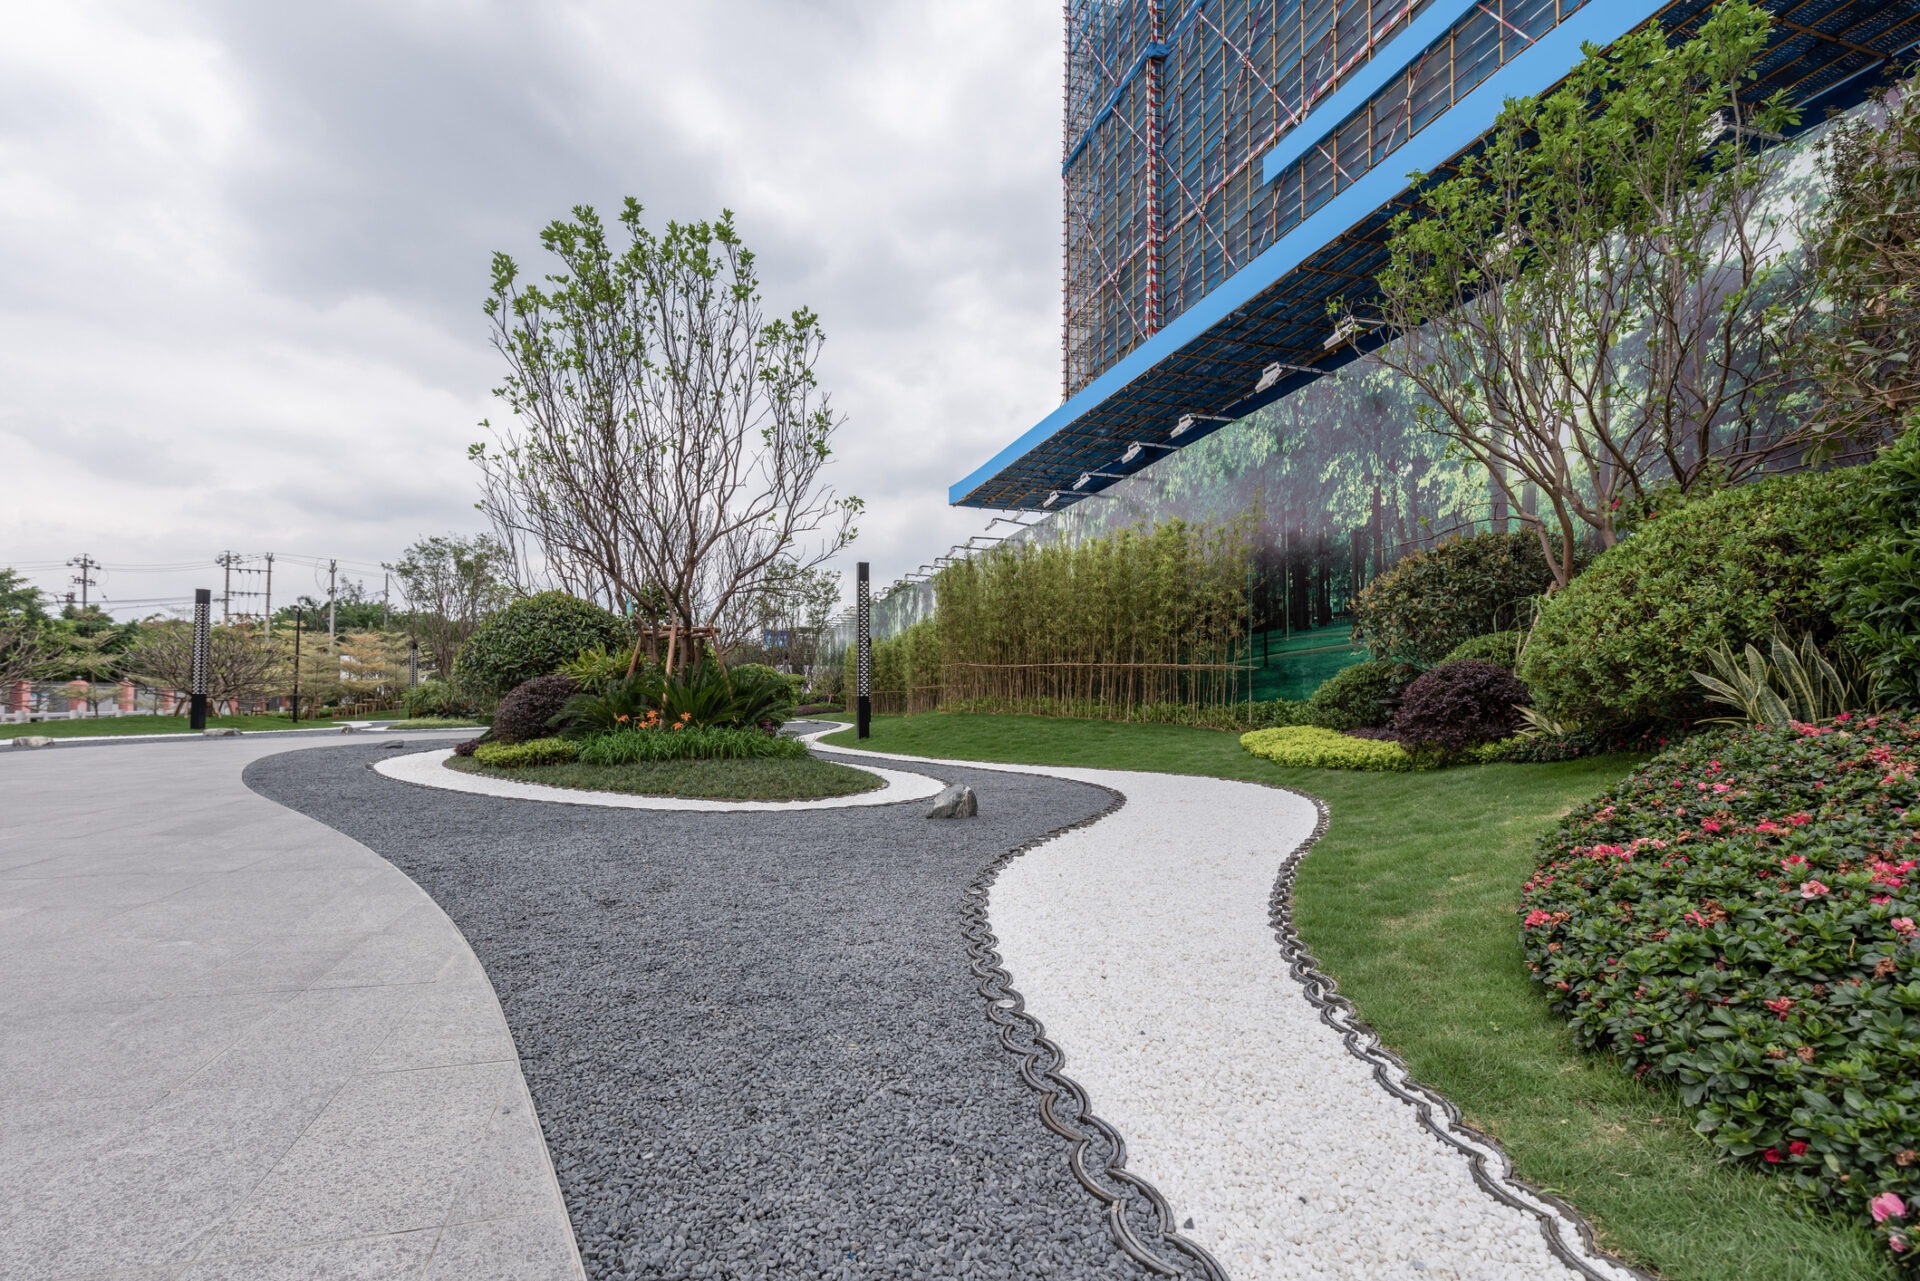 The image shows a modern landscaped garden with winding pathways, green shrubs, and a building adorned with a large forest-themed mural.